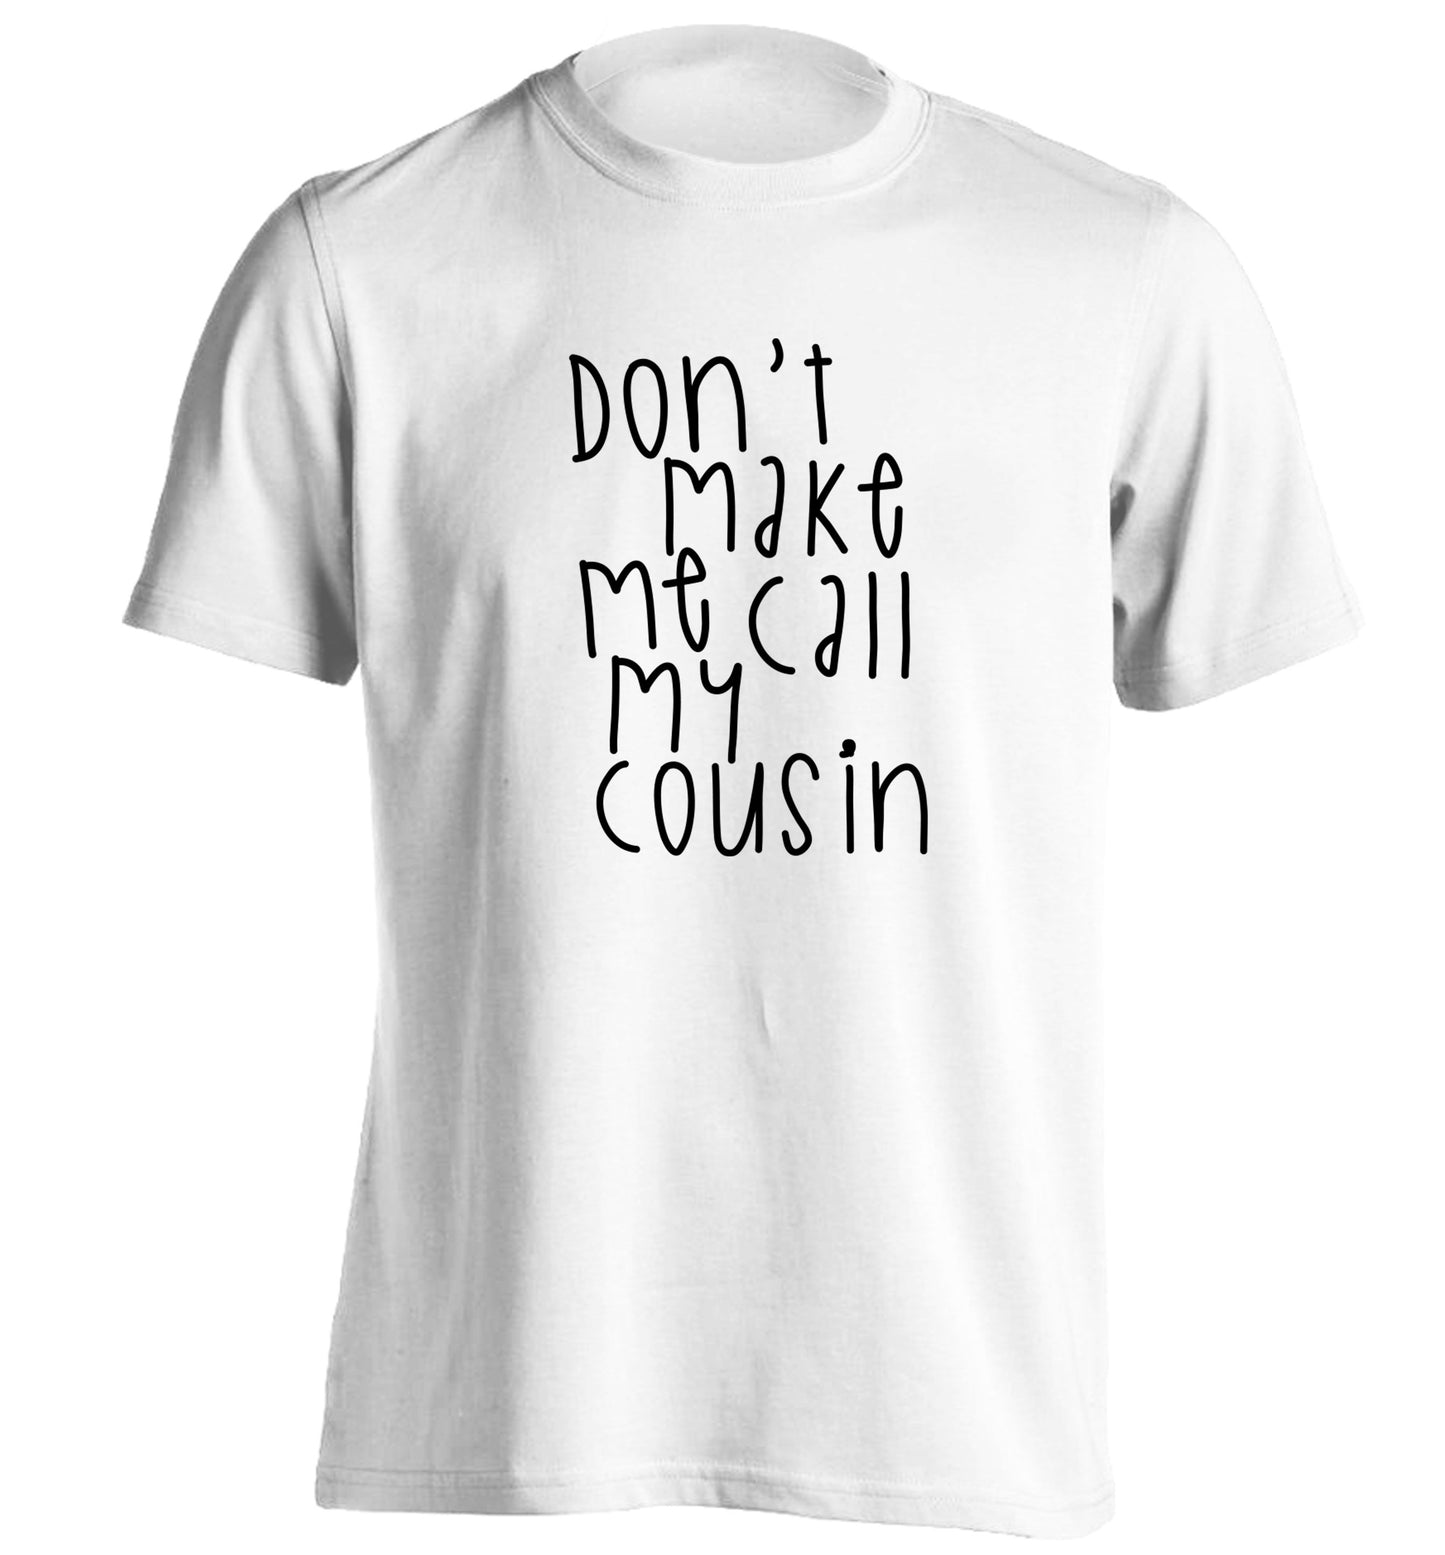 Don't make me call my cousin adults unisex white Tshirt 2XL